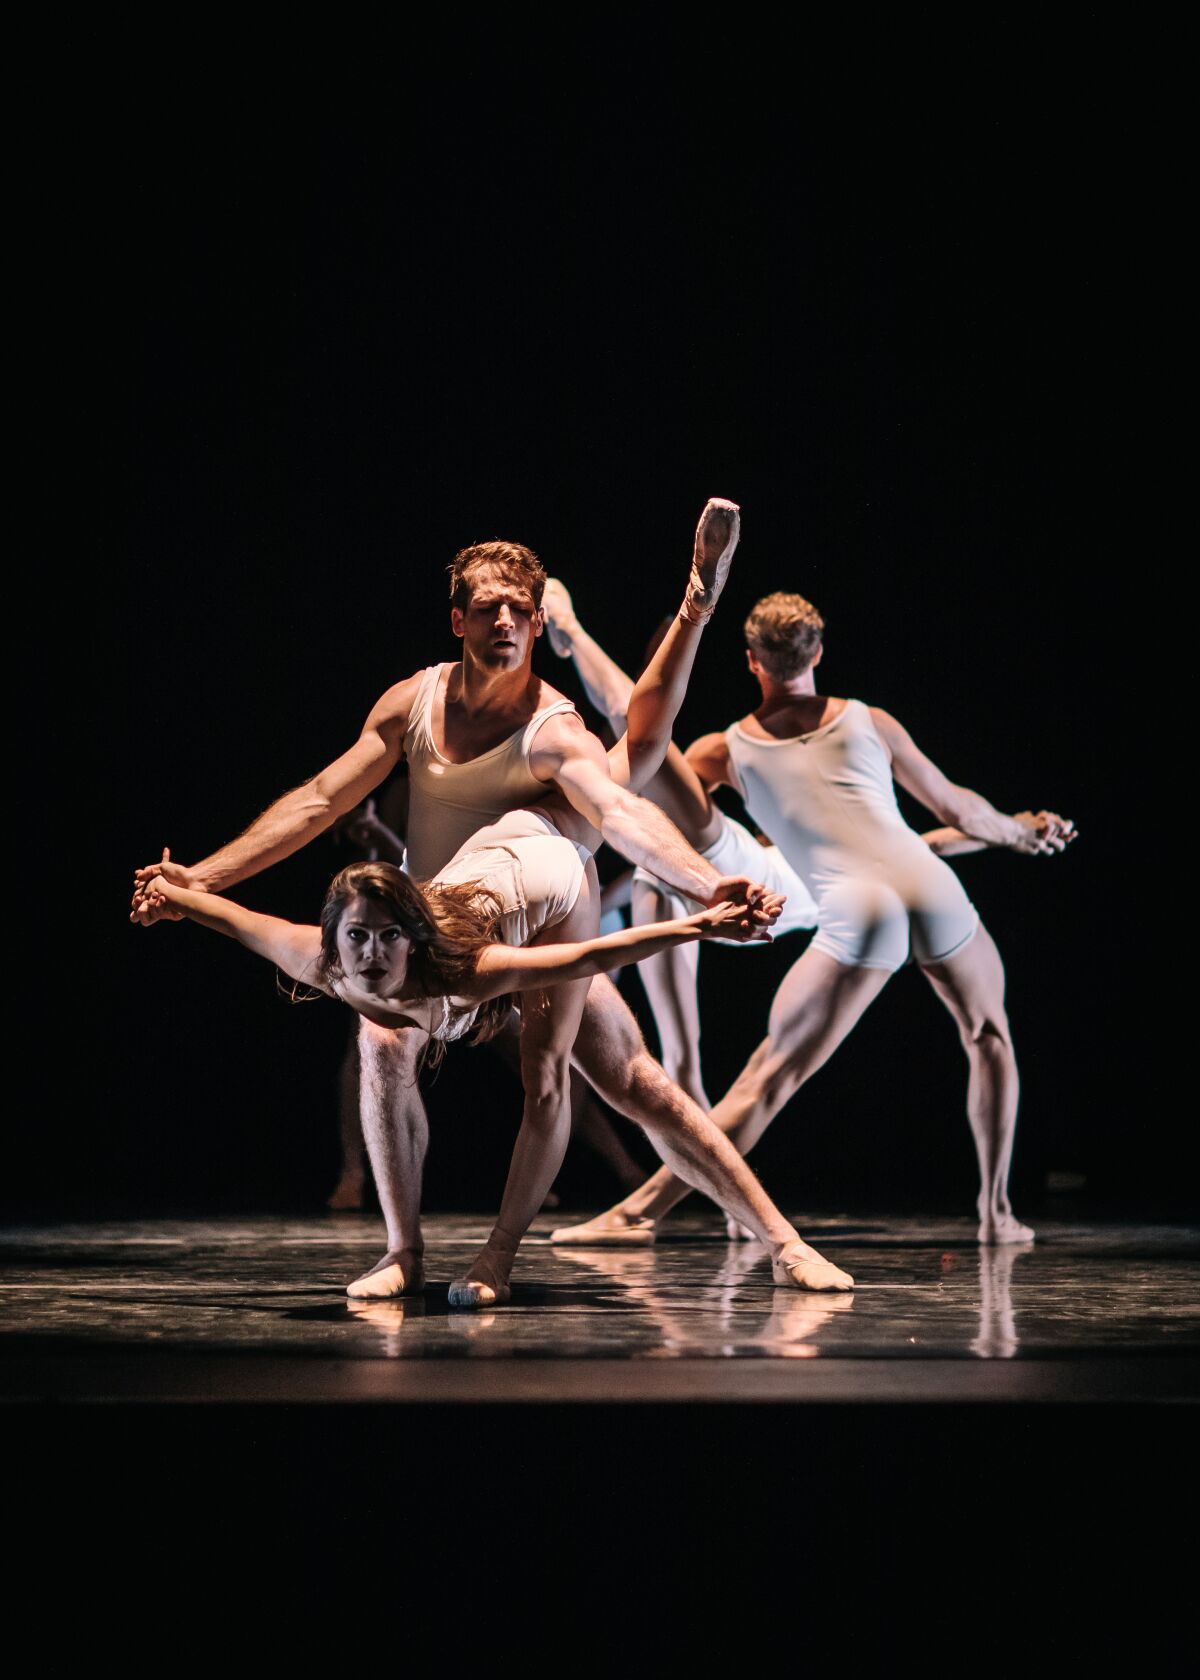 California Ballet Principal Preston Swovelin and Soloist Tiffany Smith (both front) in Septime Webre's Fluctuating Hemlines, from The Rock + Blues Project